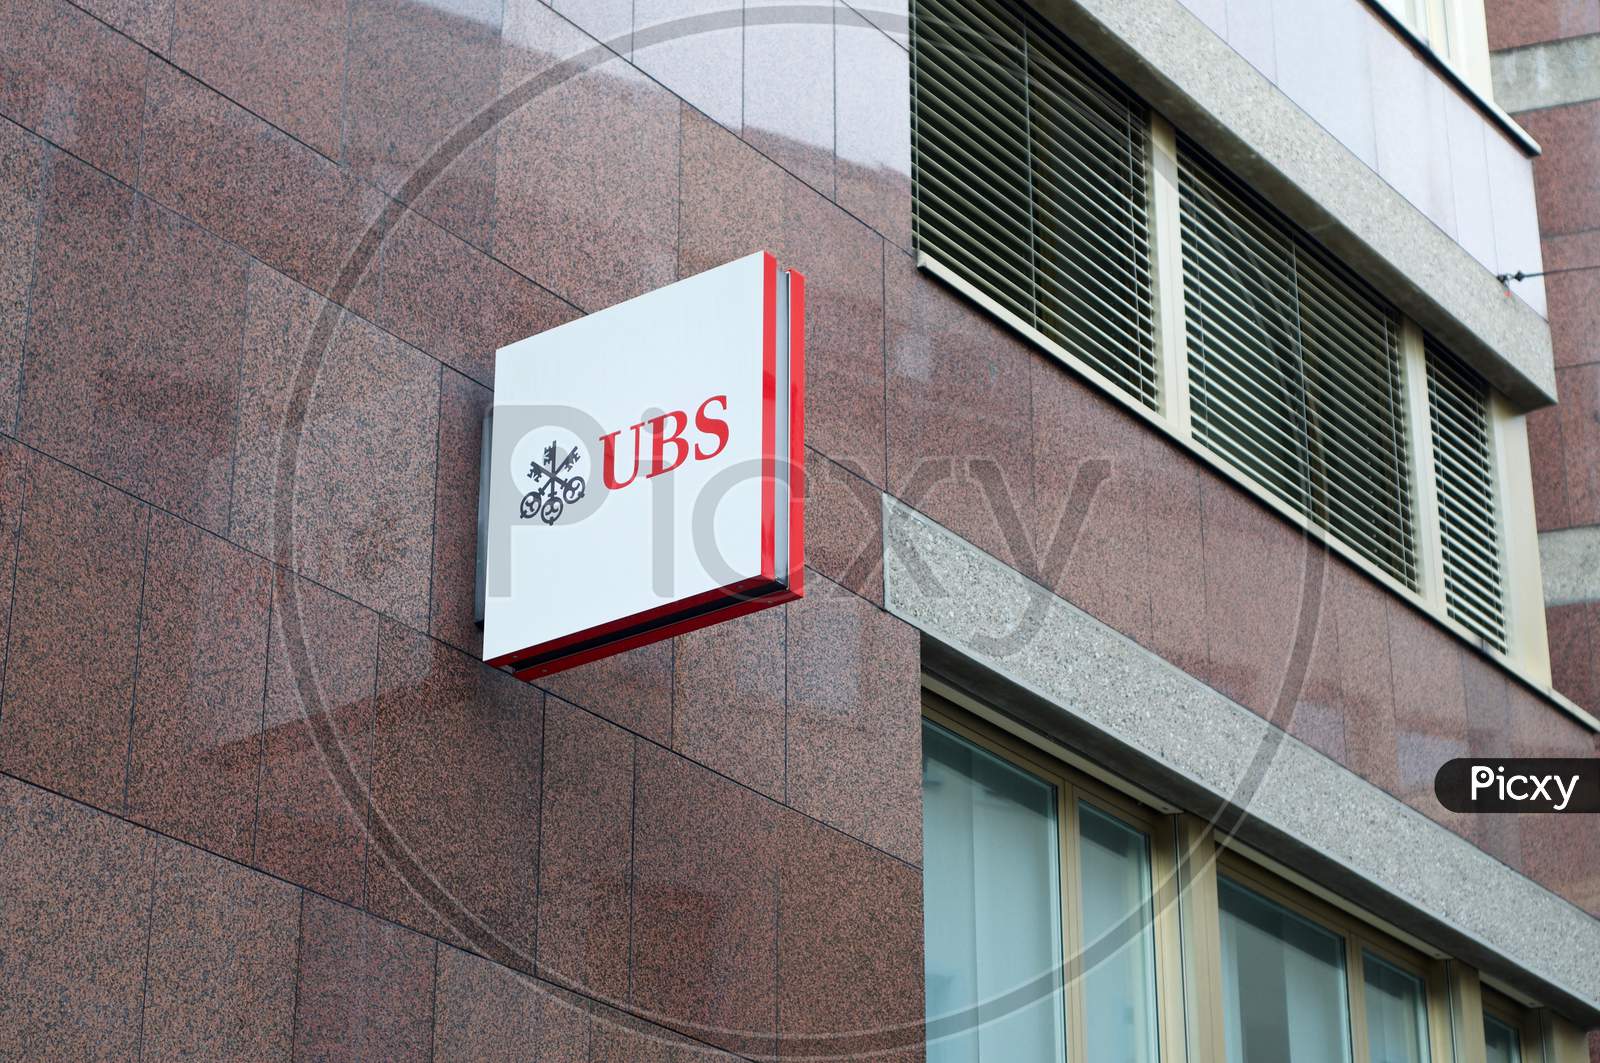 Ubs Bank Sign Haning On A Building In Lugano